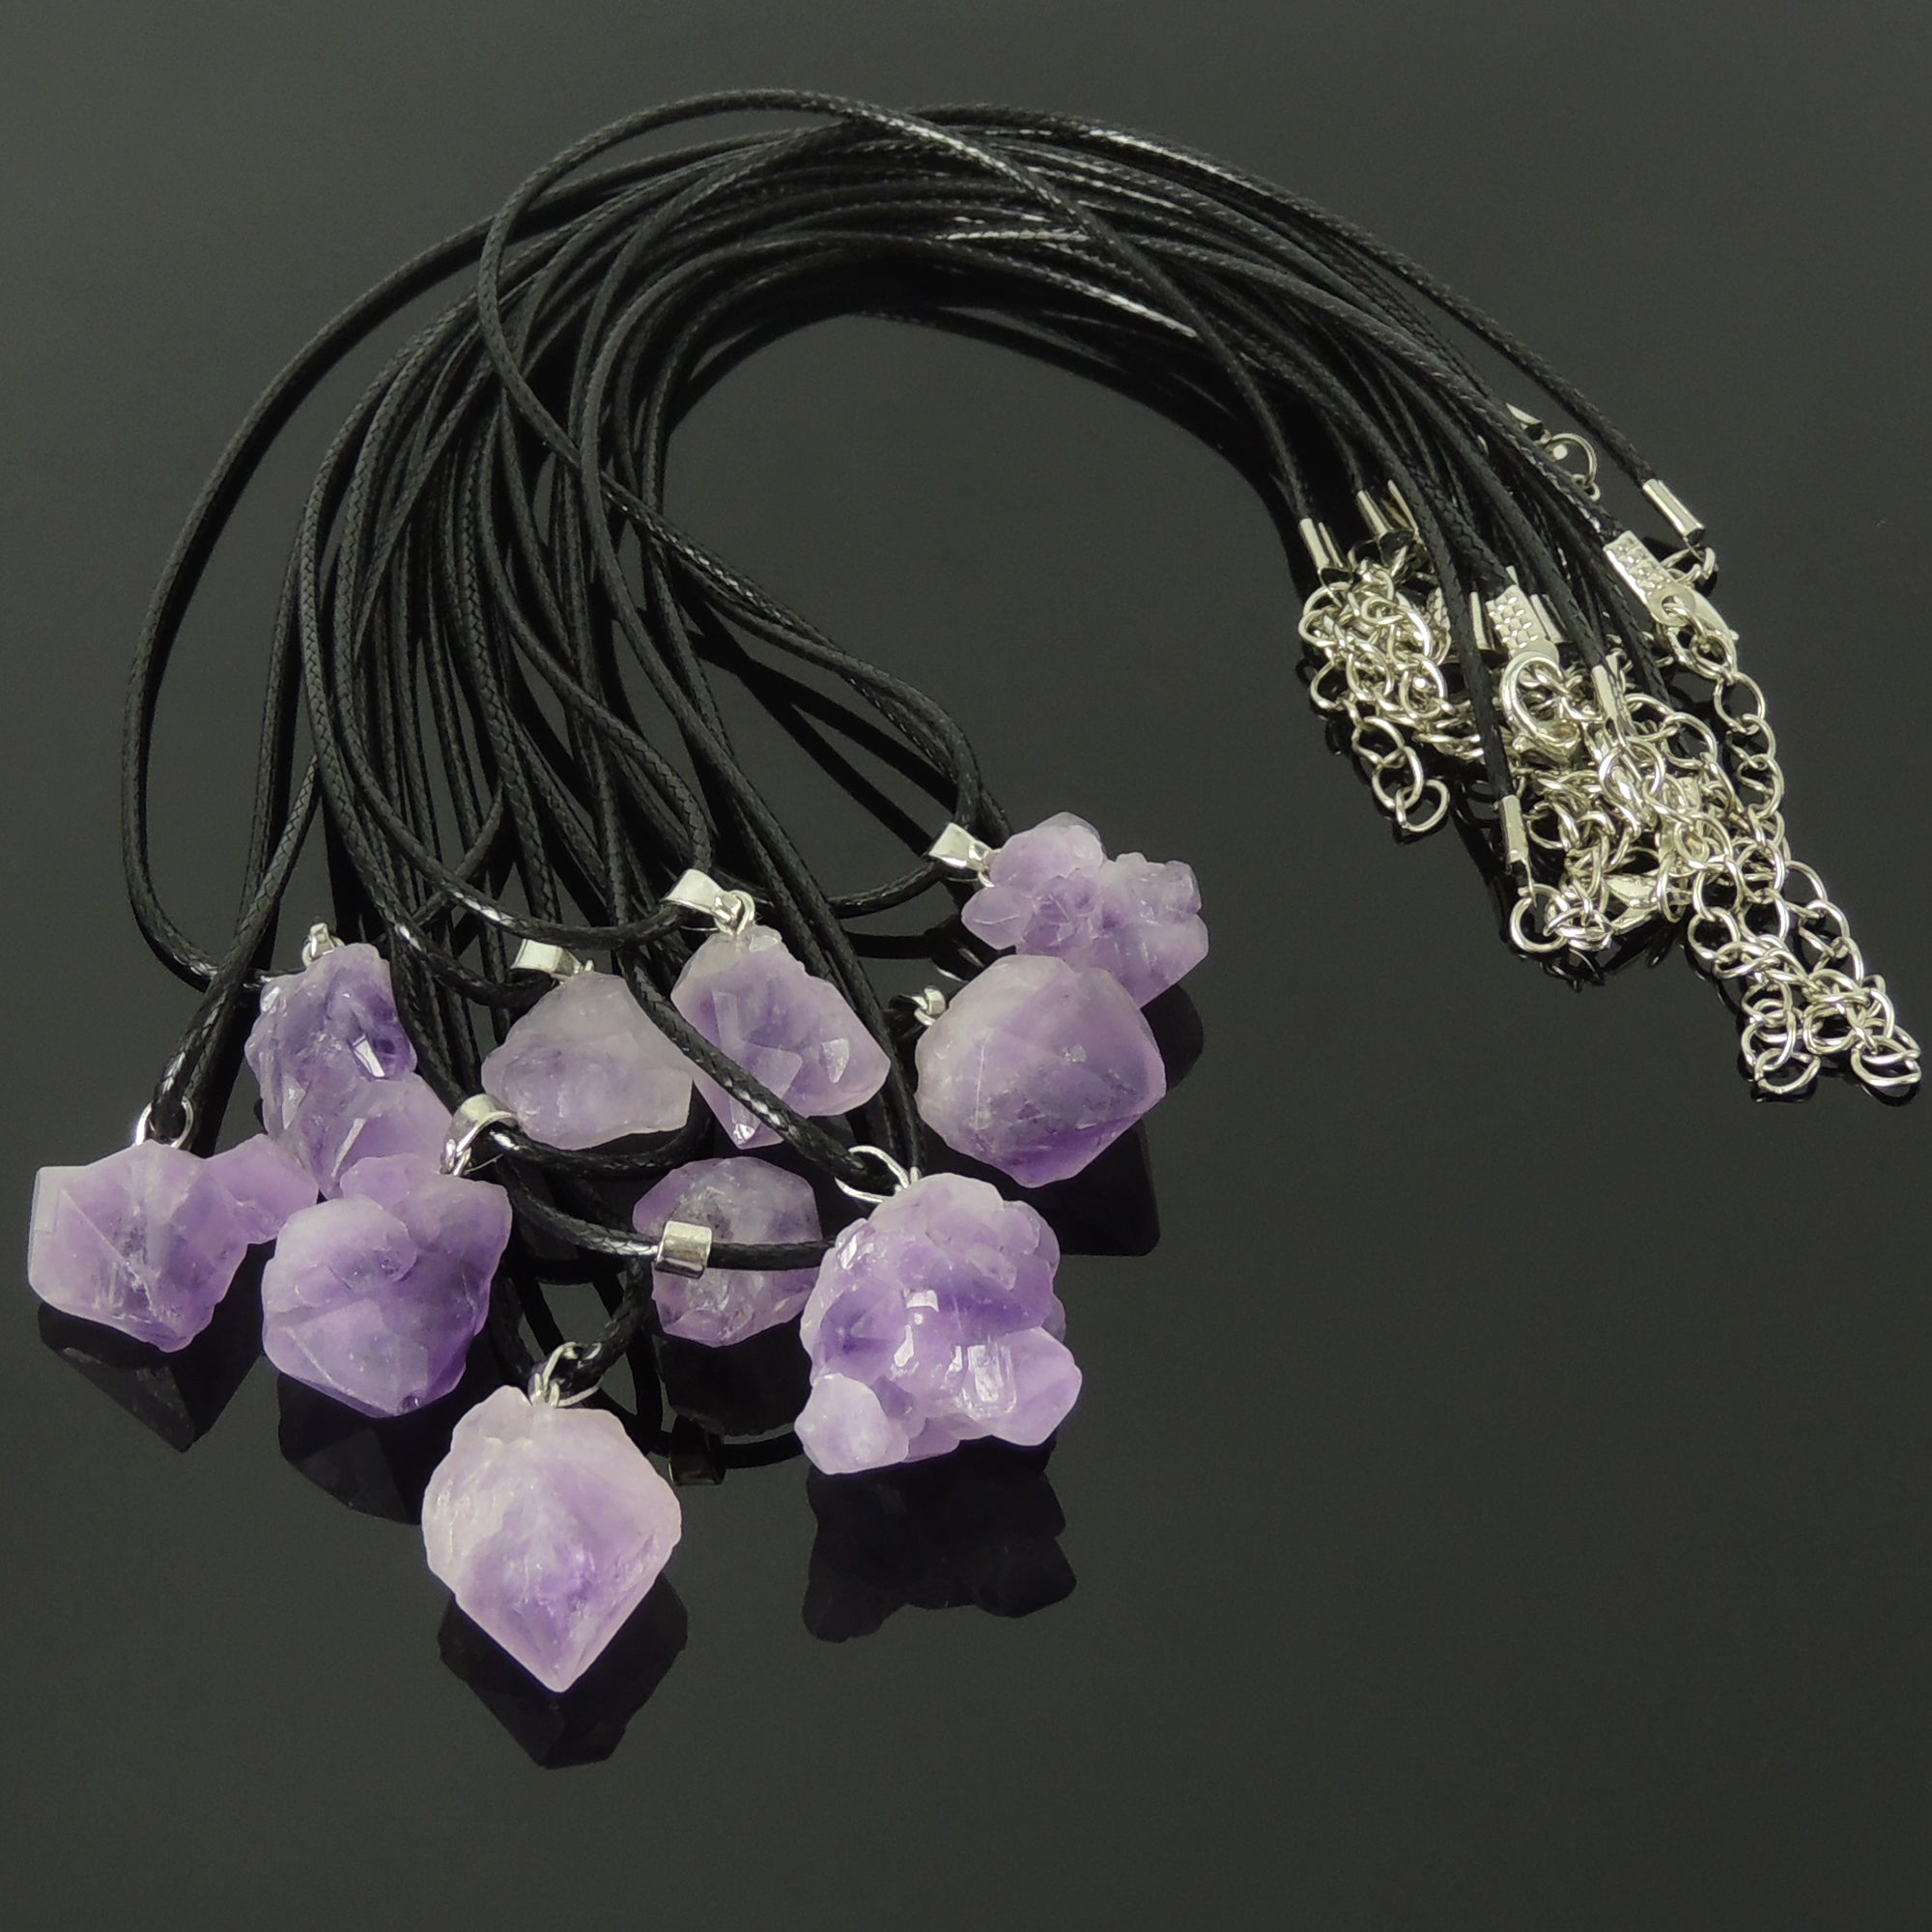 Gorgeous Amethyst Necklace Psychic Chakra Crystal Healing Reiki